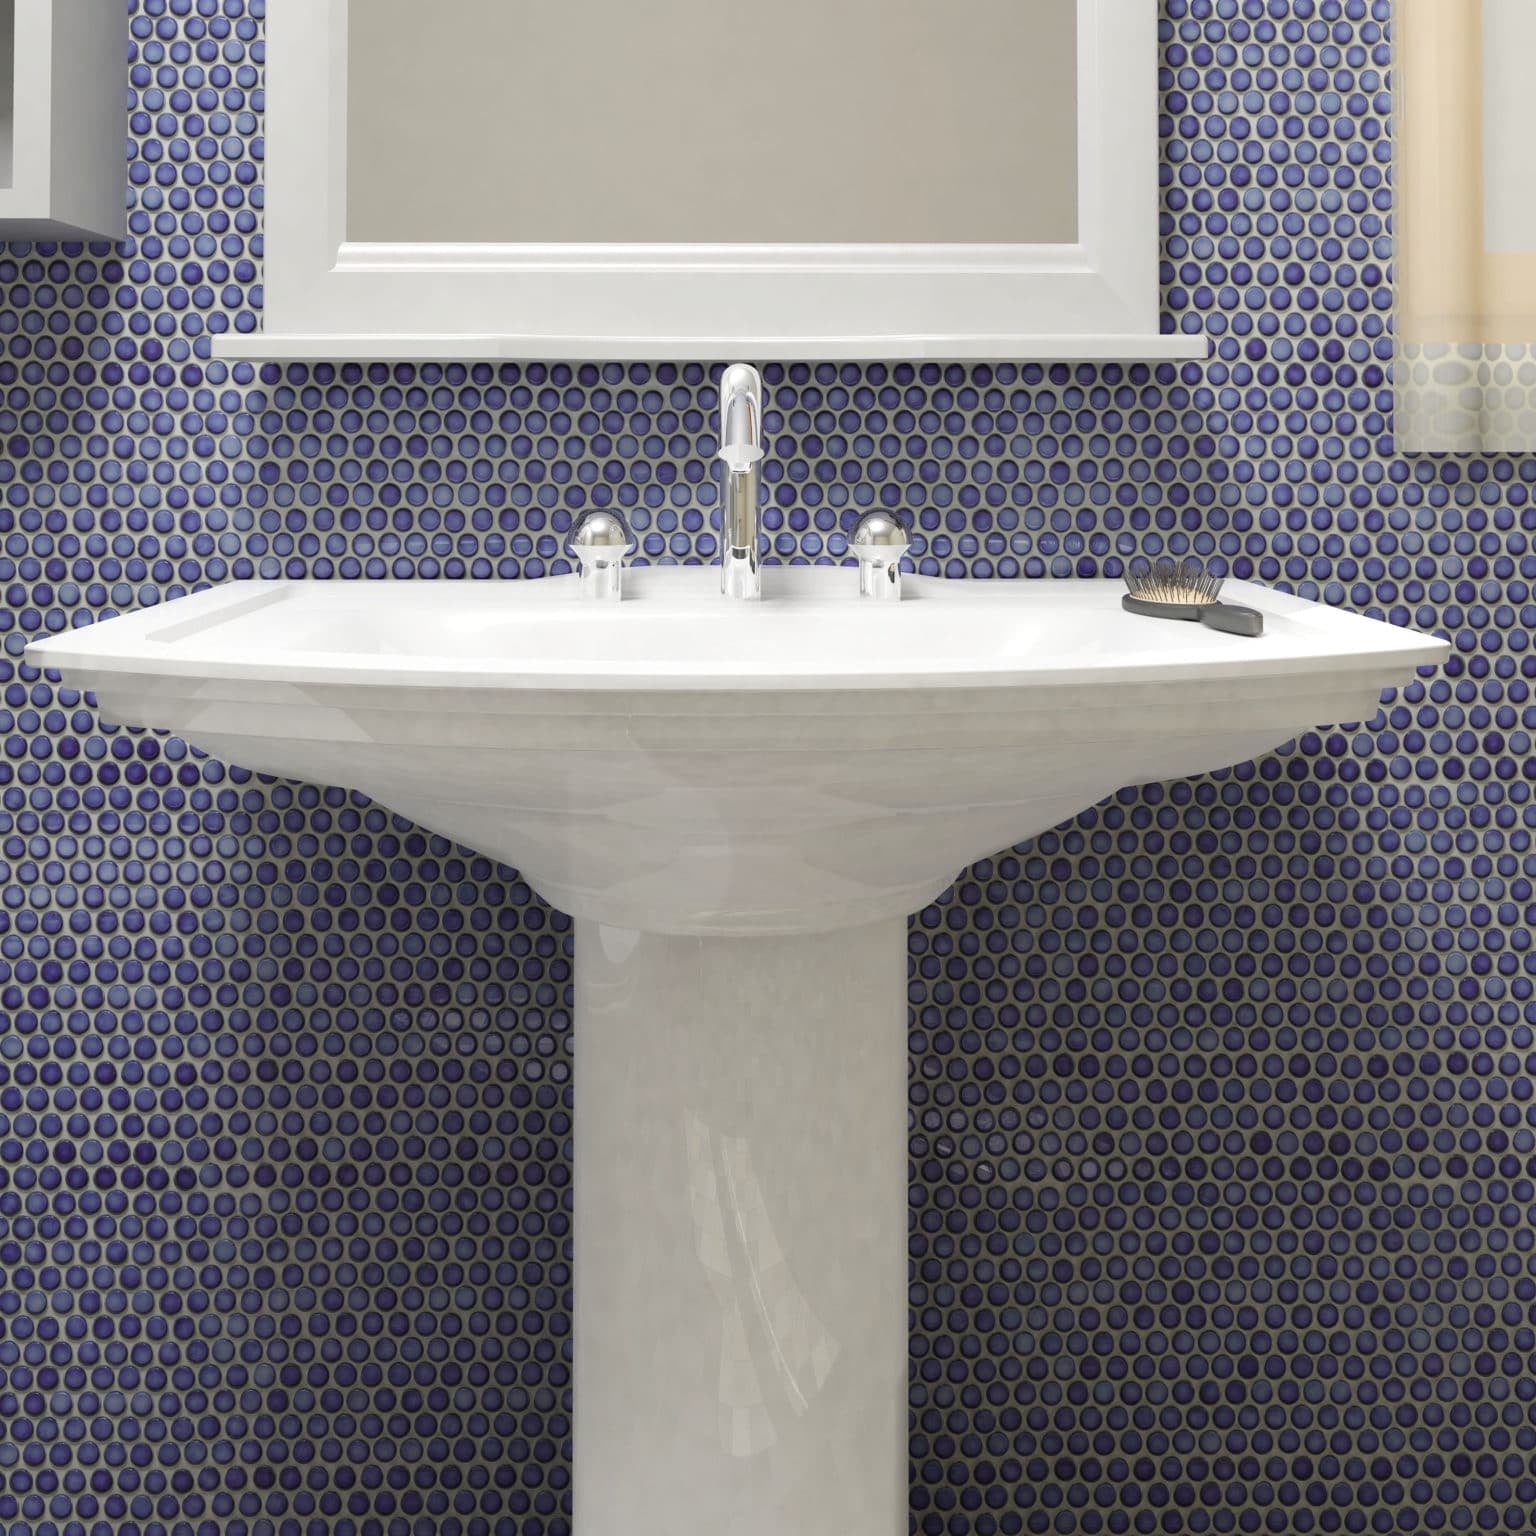 Sapphire Glossy Hudson Penny Round Tile on Bathroom Wall